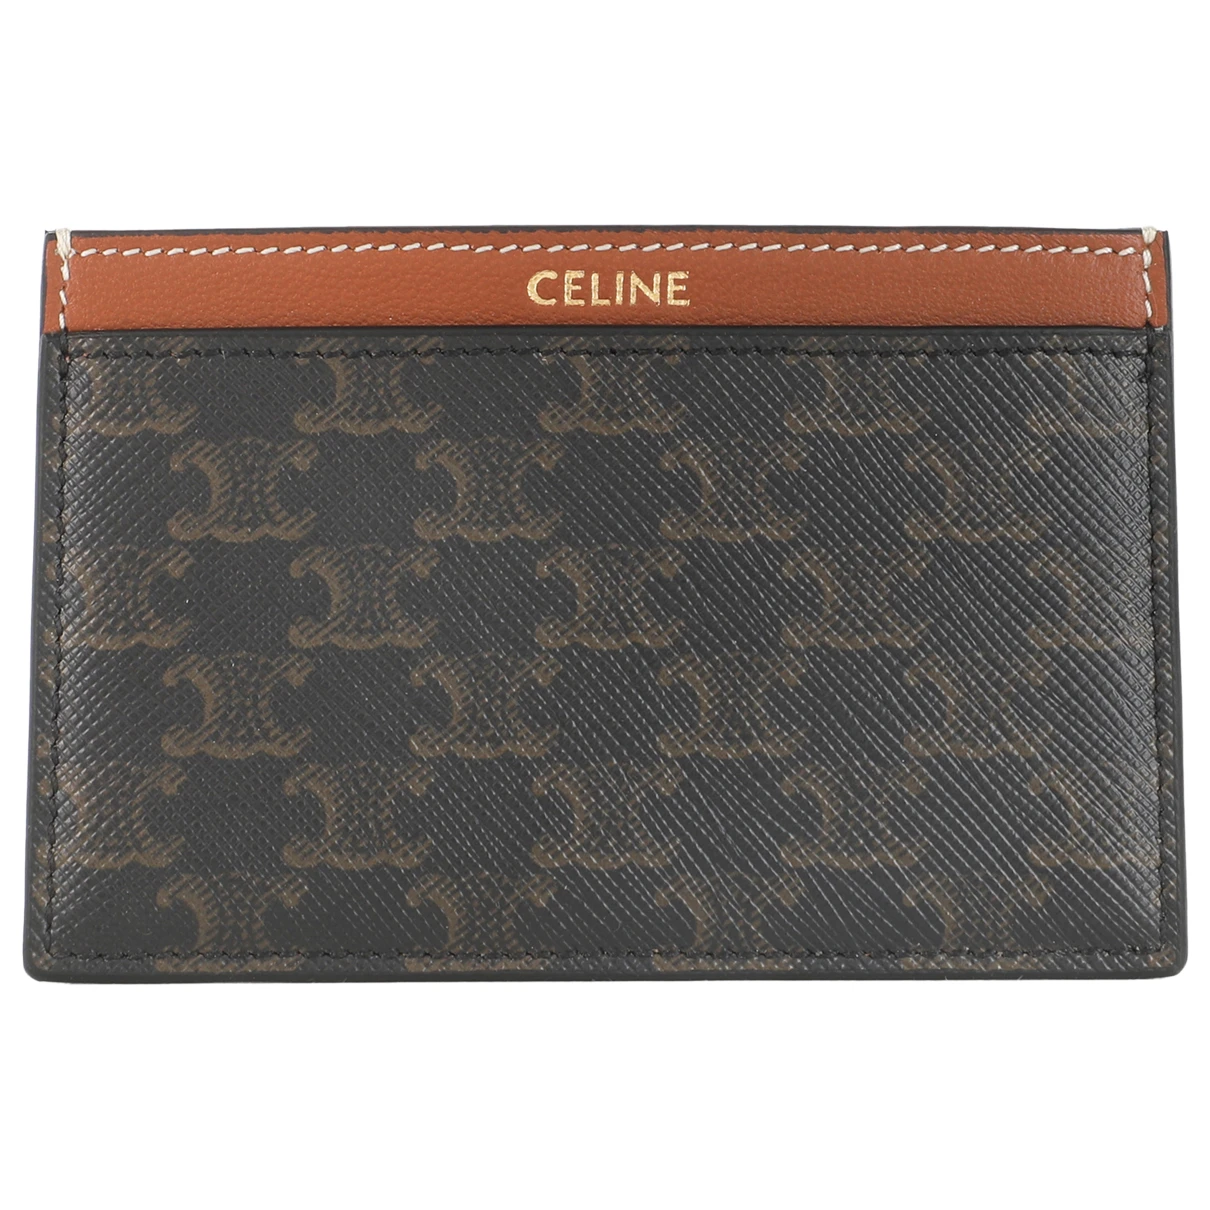 accessories Celine purses, wallets & cases for Female Cloth. Used condition